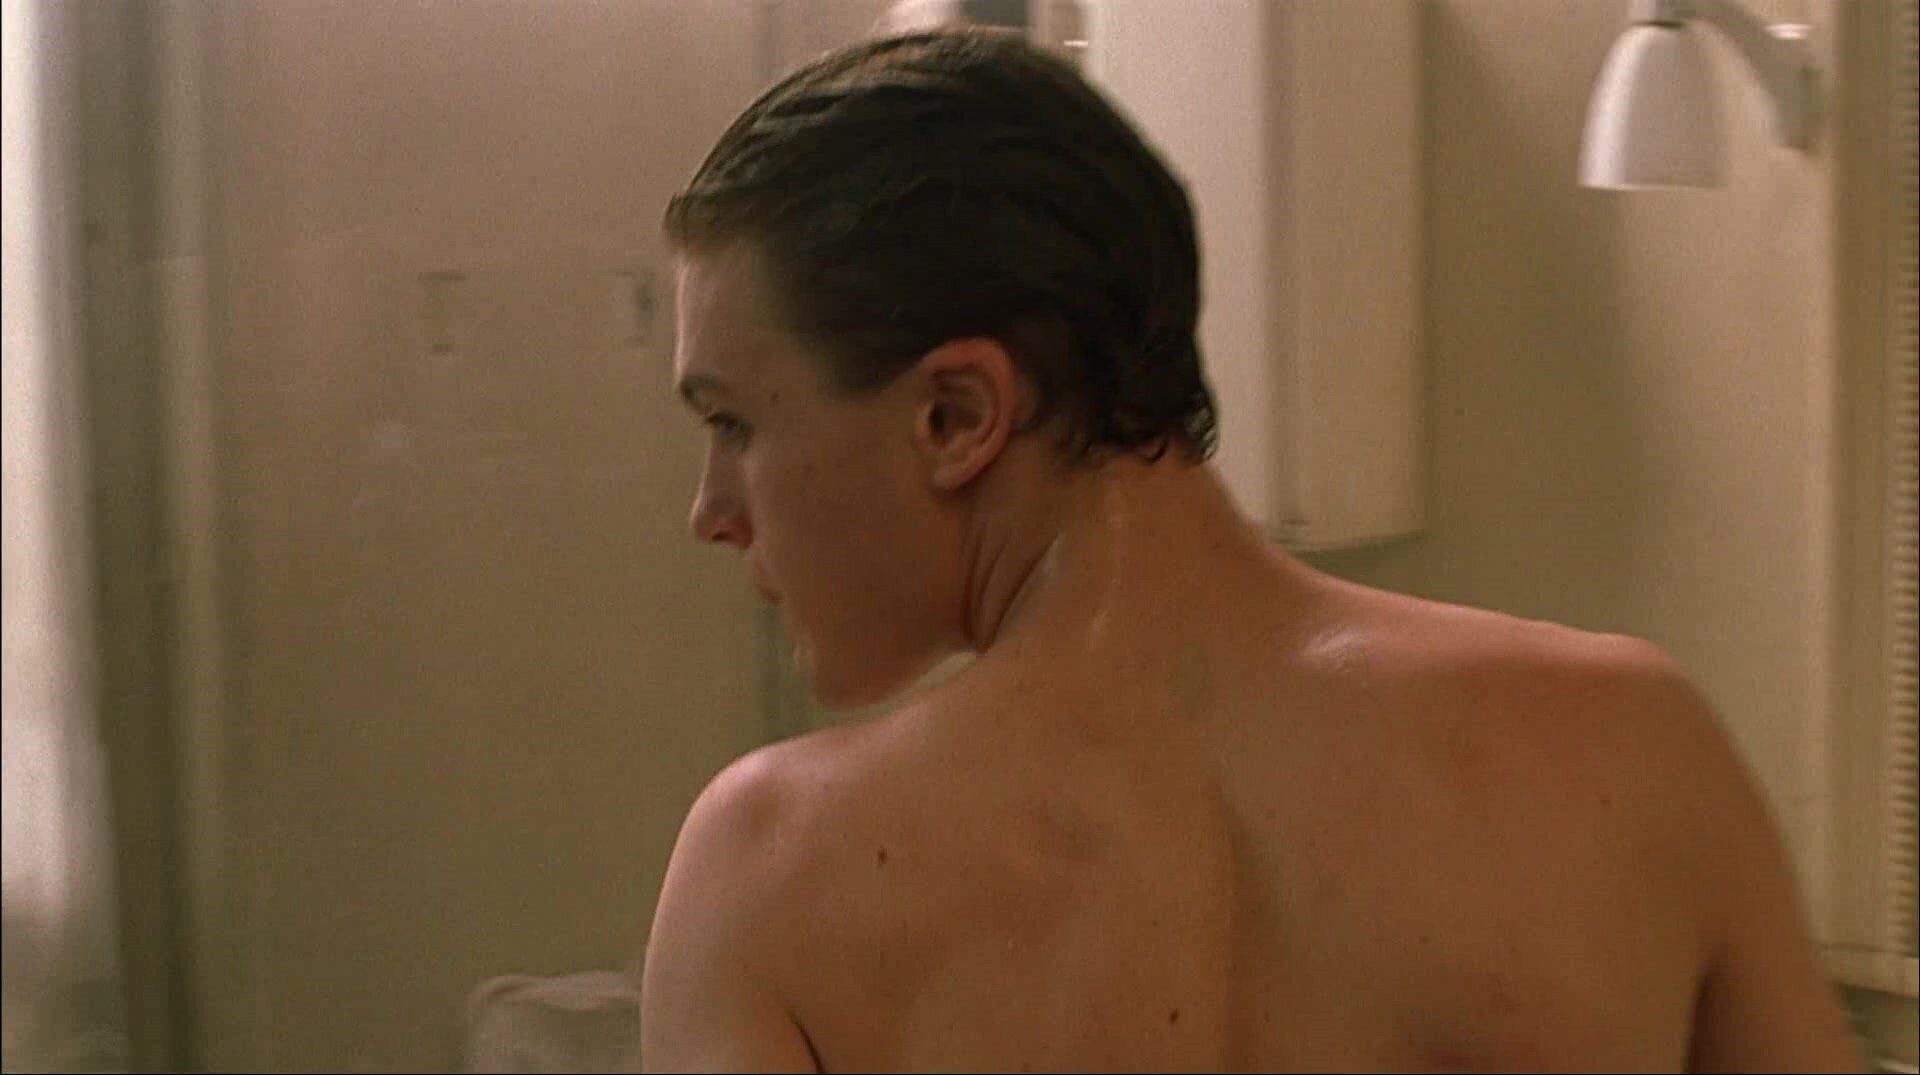 HOT ACTORS NAKED IN THE DREAMERS